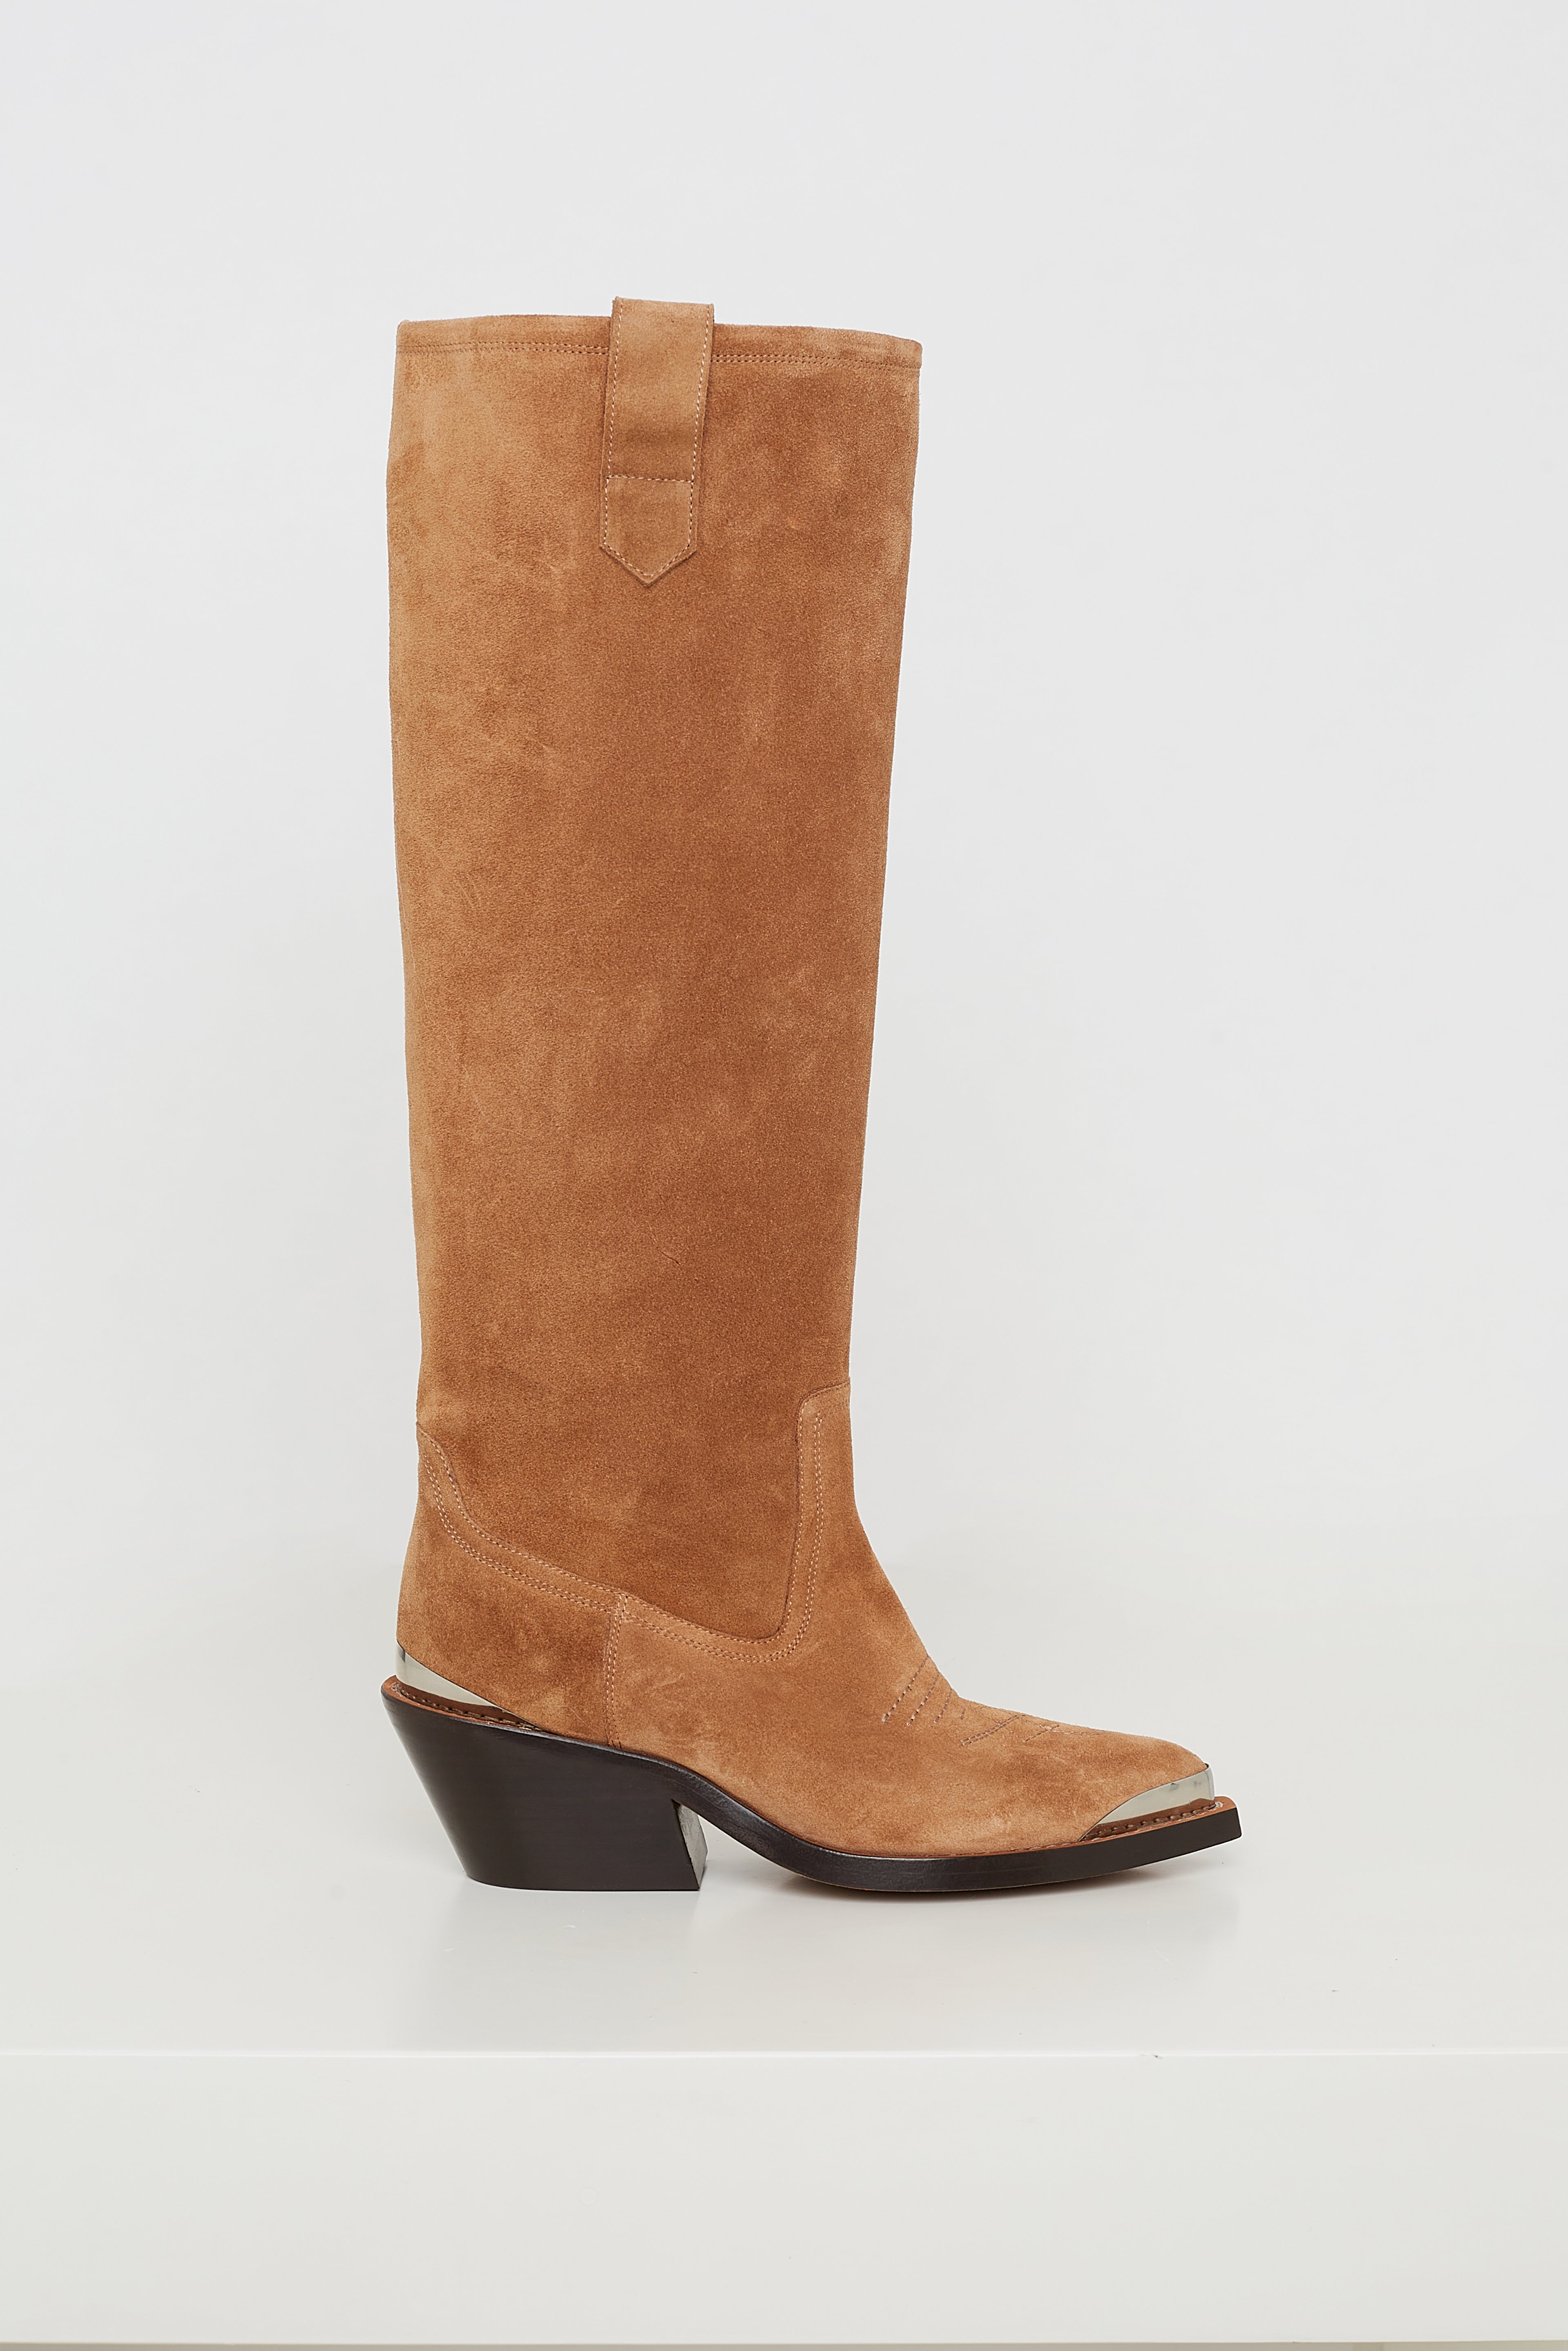 Dorothee-Schumacher-OUTLET-SALE-WESTERN-SUMMER-Tall-Boot-Stiefel-Stiefeletten-ARCHIVE-COLLECTION-2.jpg